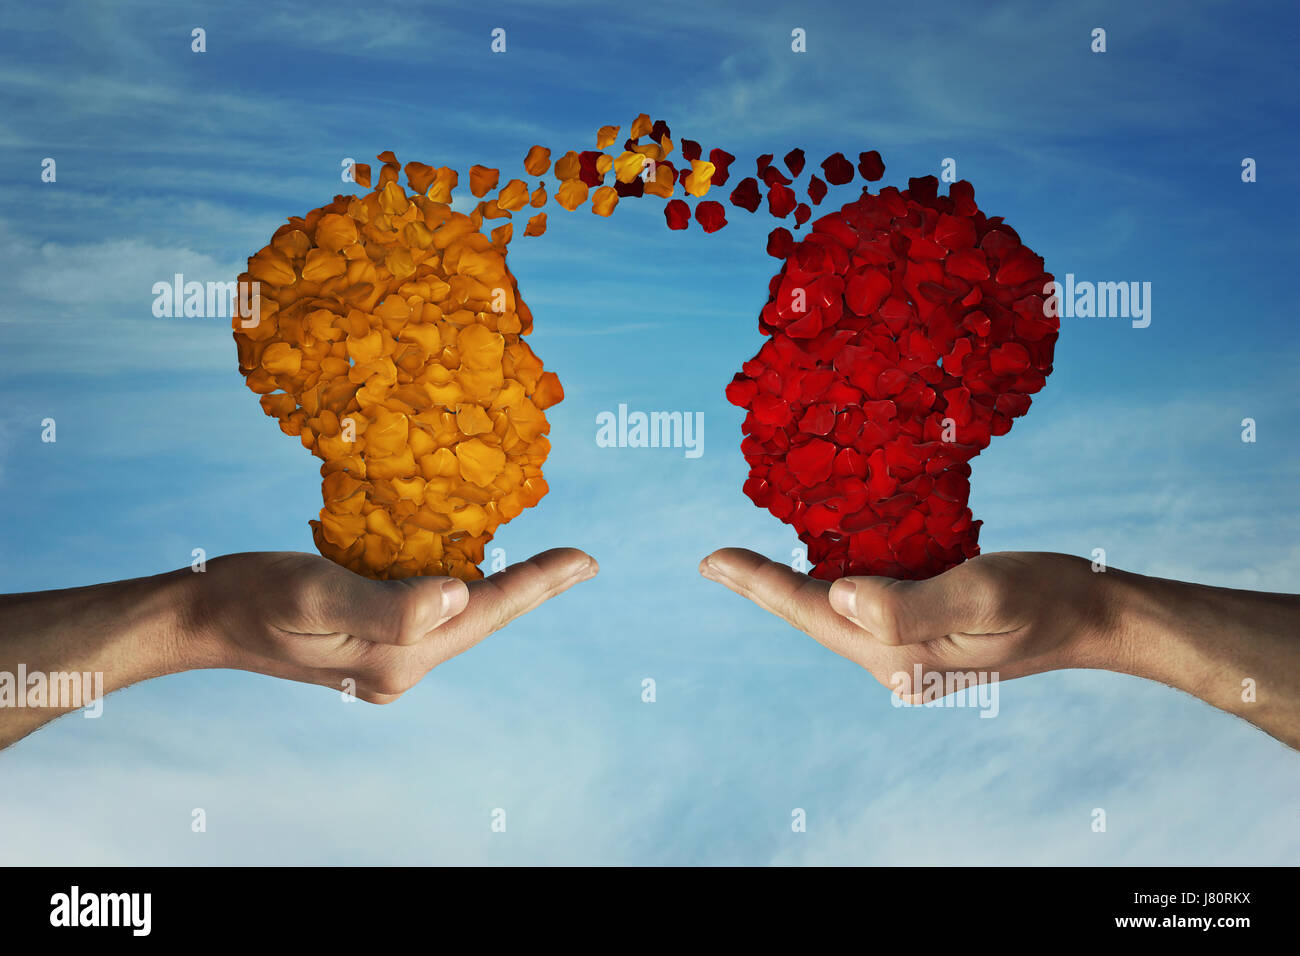 Two hands holding rose petal heads on blu sky background. Romantic relationship concept. Attachment and love symbol, giving and exchange of feelings a Stock Photo